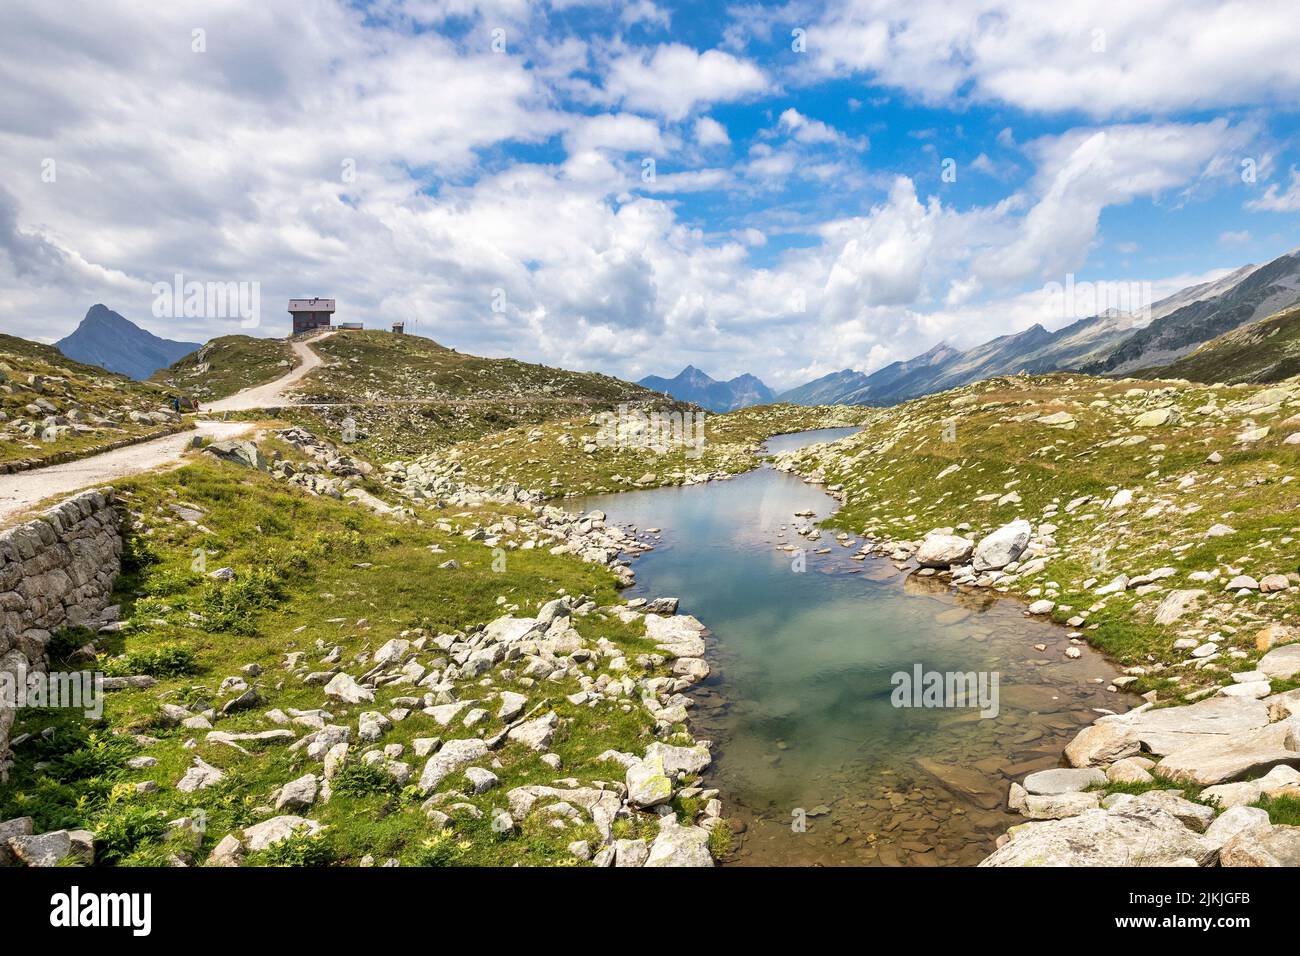 Italy, South Tyrol, Bolzano, val di Vizze / Pfitschtal, passo di Vizze / Pfitscher Joch, the Pfitscherjoch Haus, mountain refuge on the crossing border between Italy and Austria / South Tyrol and Zillertal Stock Photo